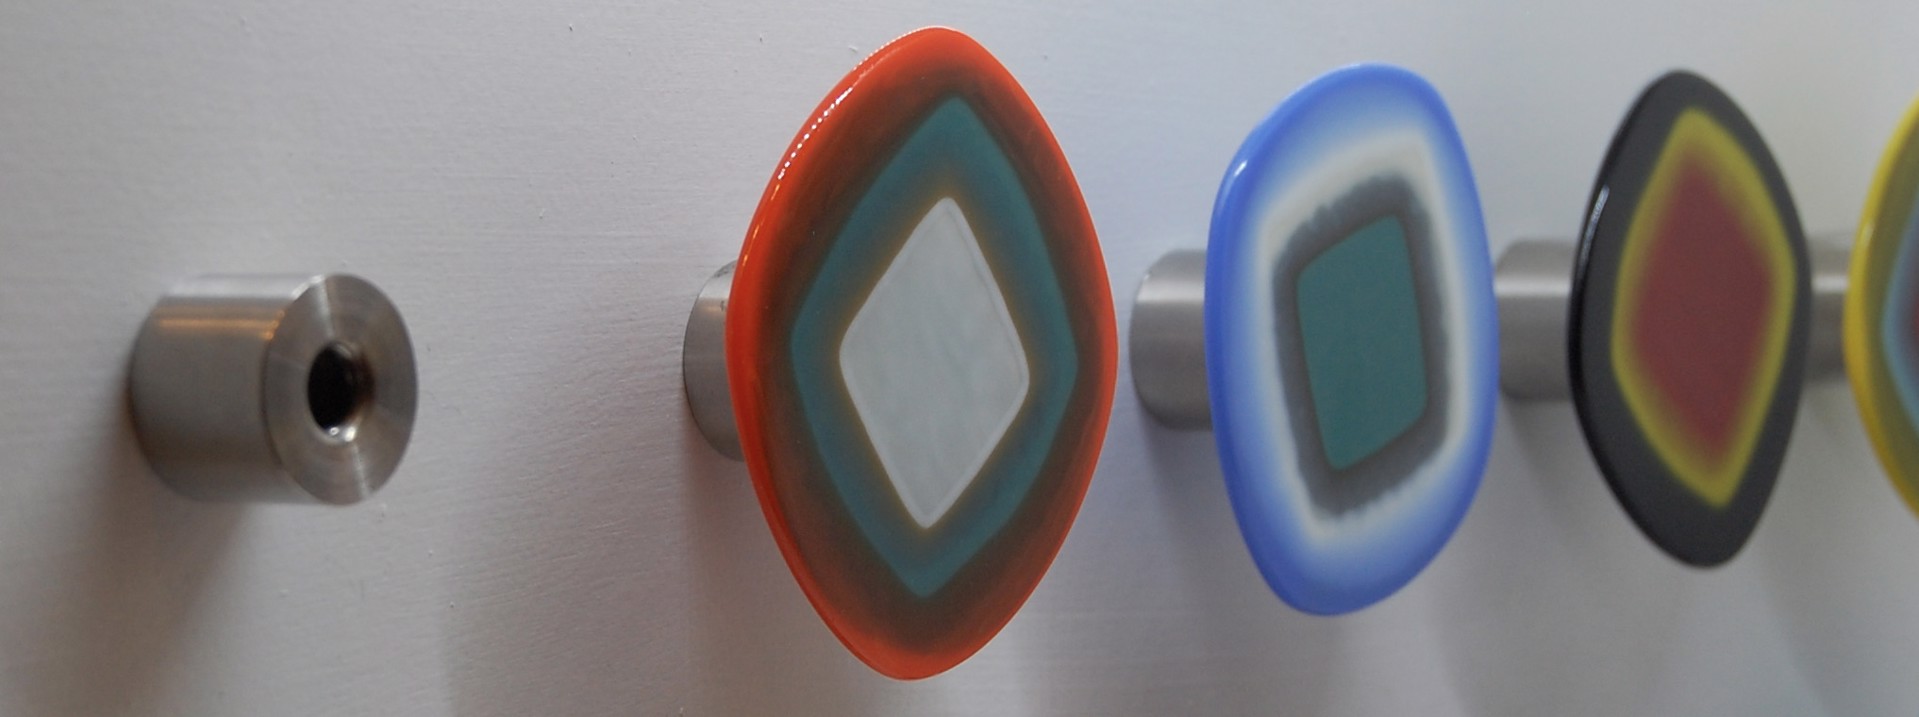 Compressed Wall Art / Knobs / Pulls/ Hooks by Chris Cox